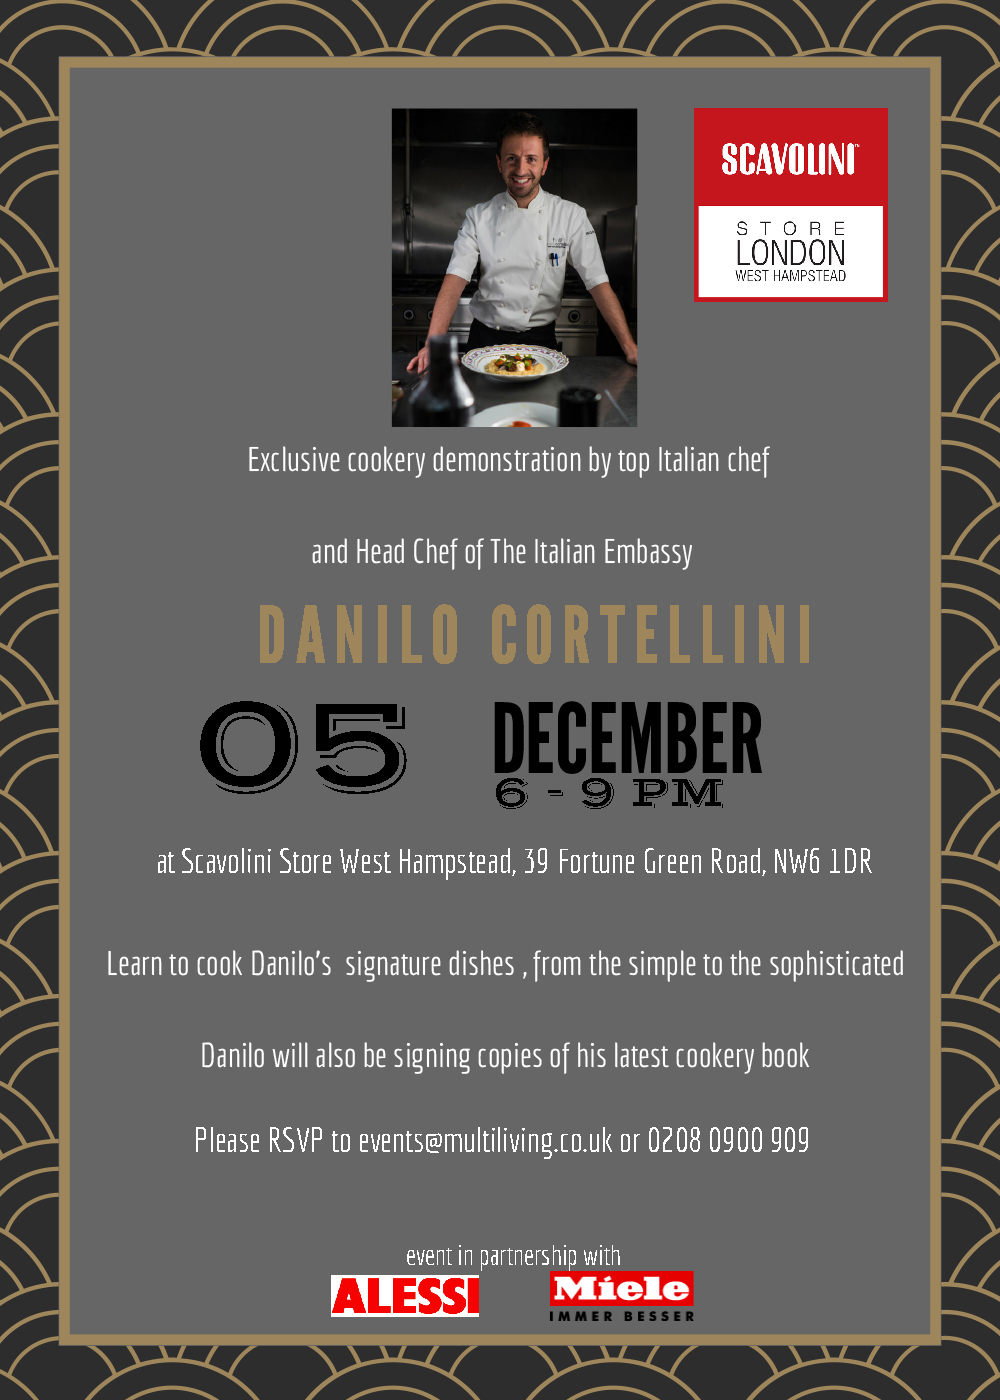  Exclusive cookery demonstration by top Italian chef